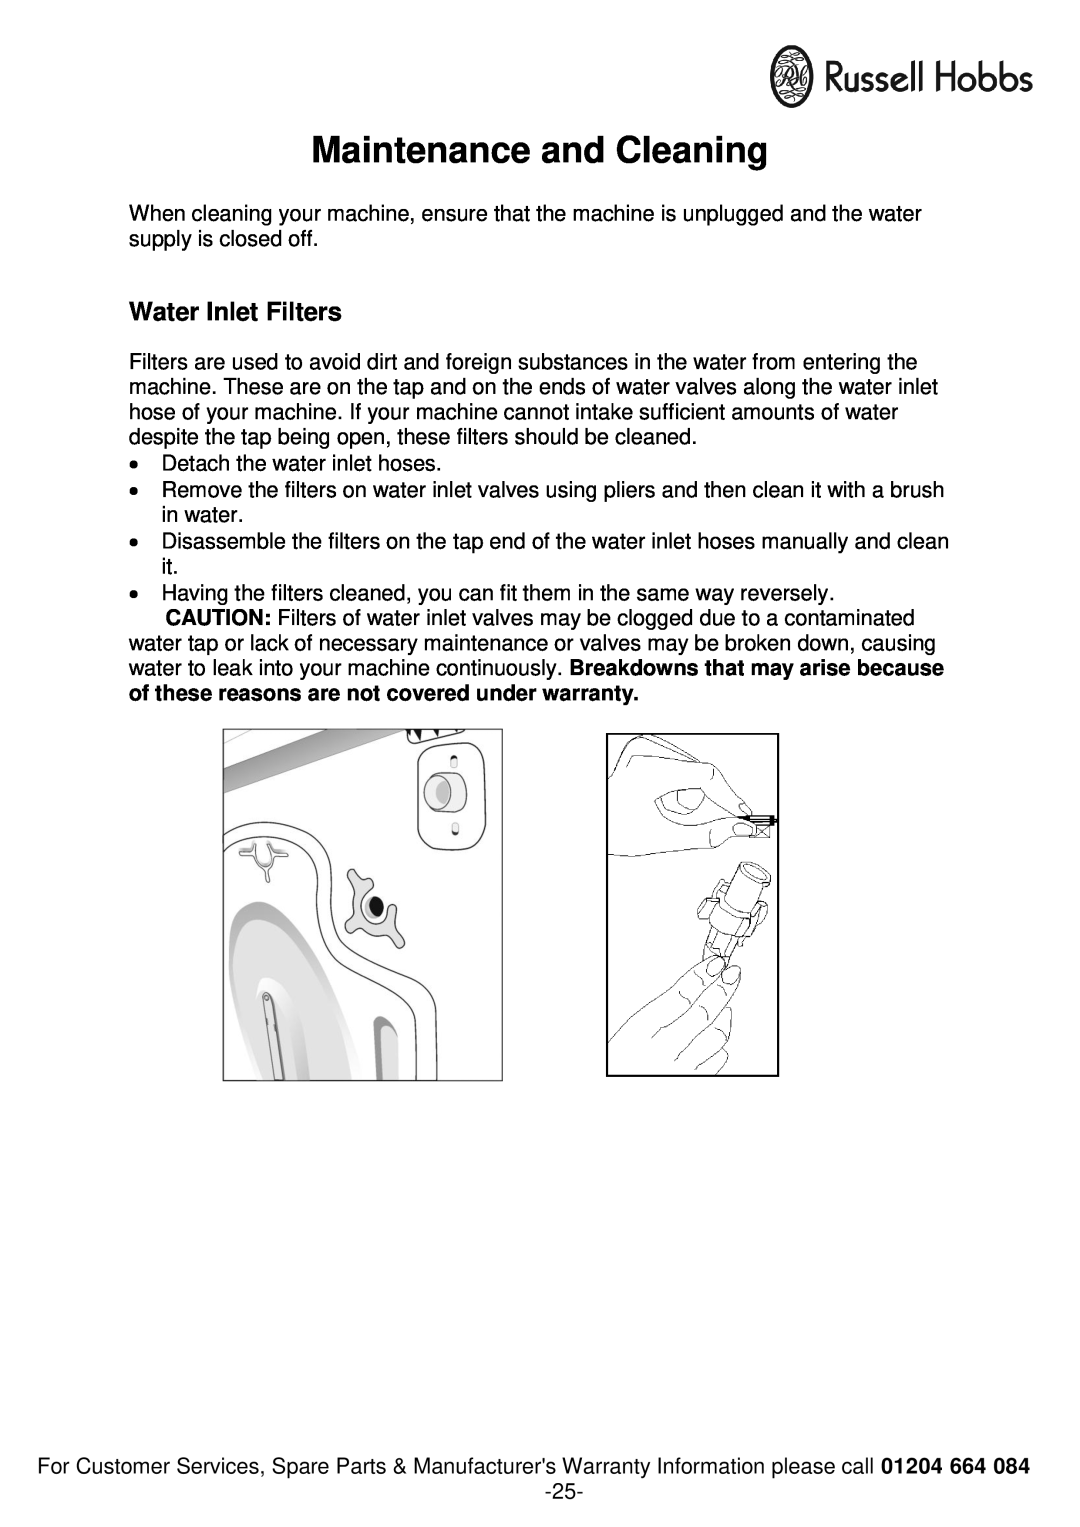 Russell Hobbs RH1261TW instruction manual Maintenance and Cleaning, Water Inlet Filters 